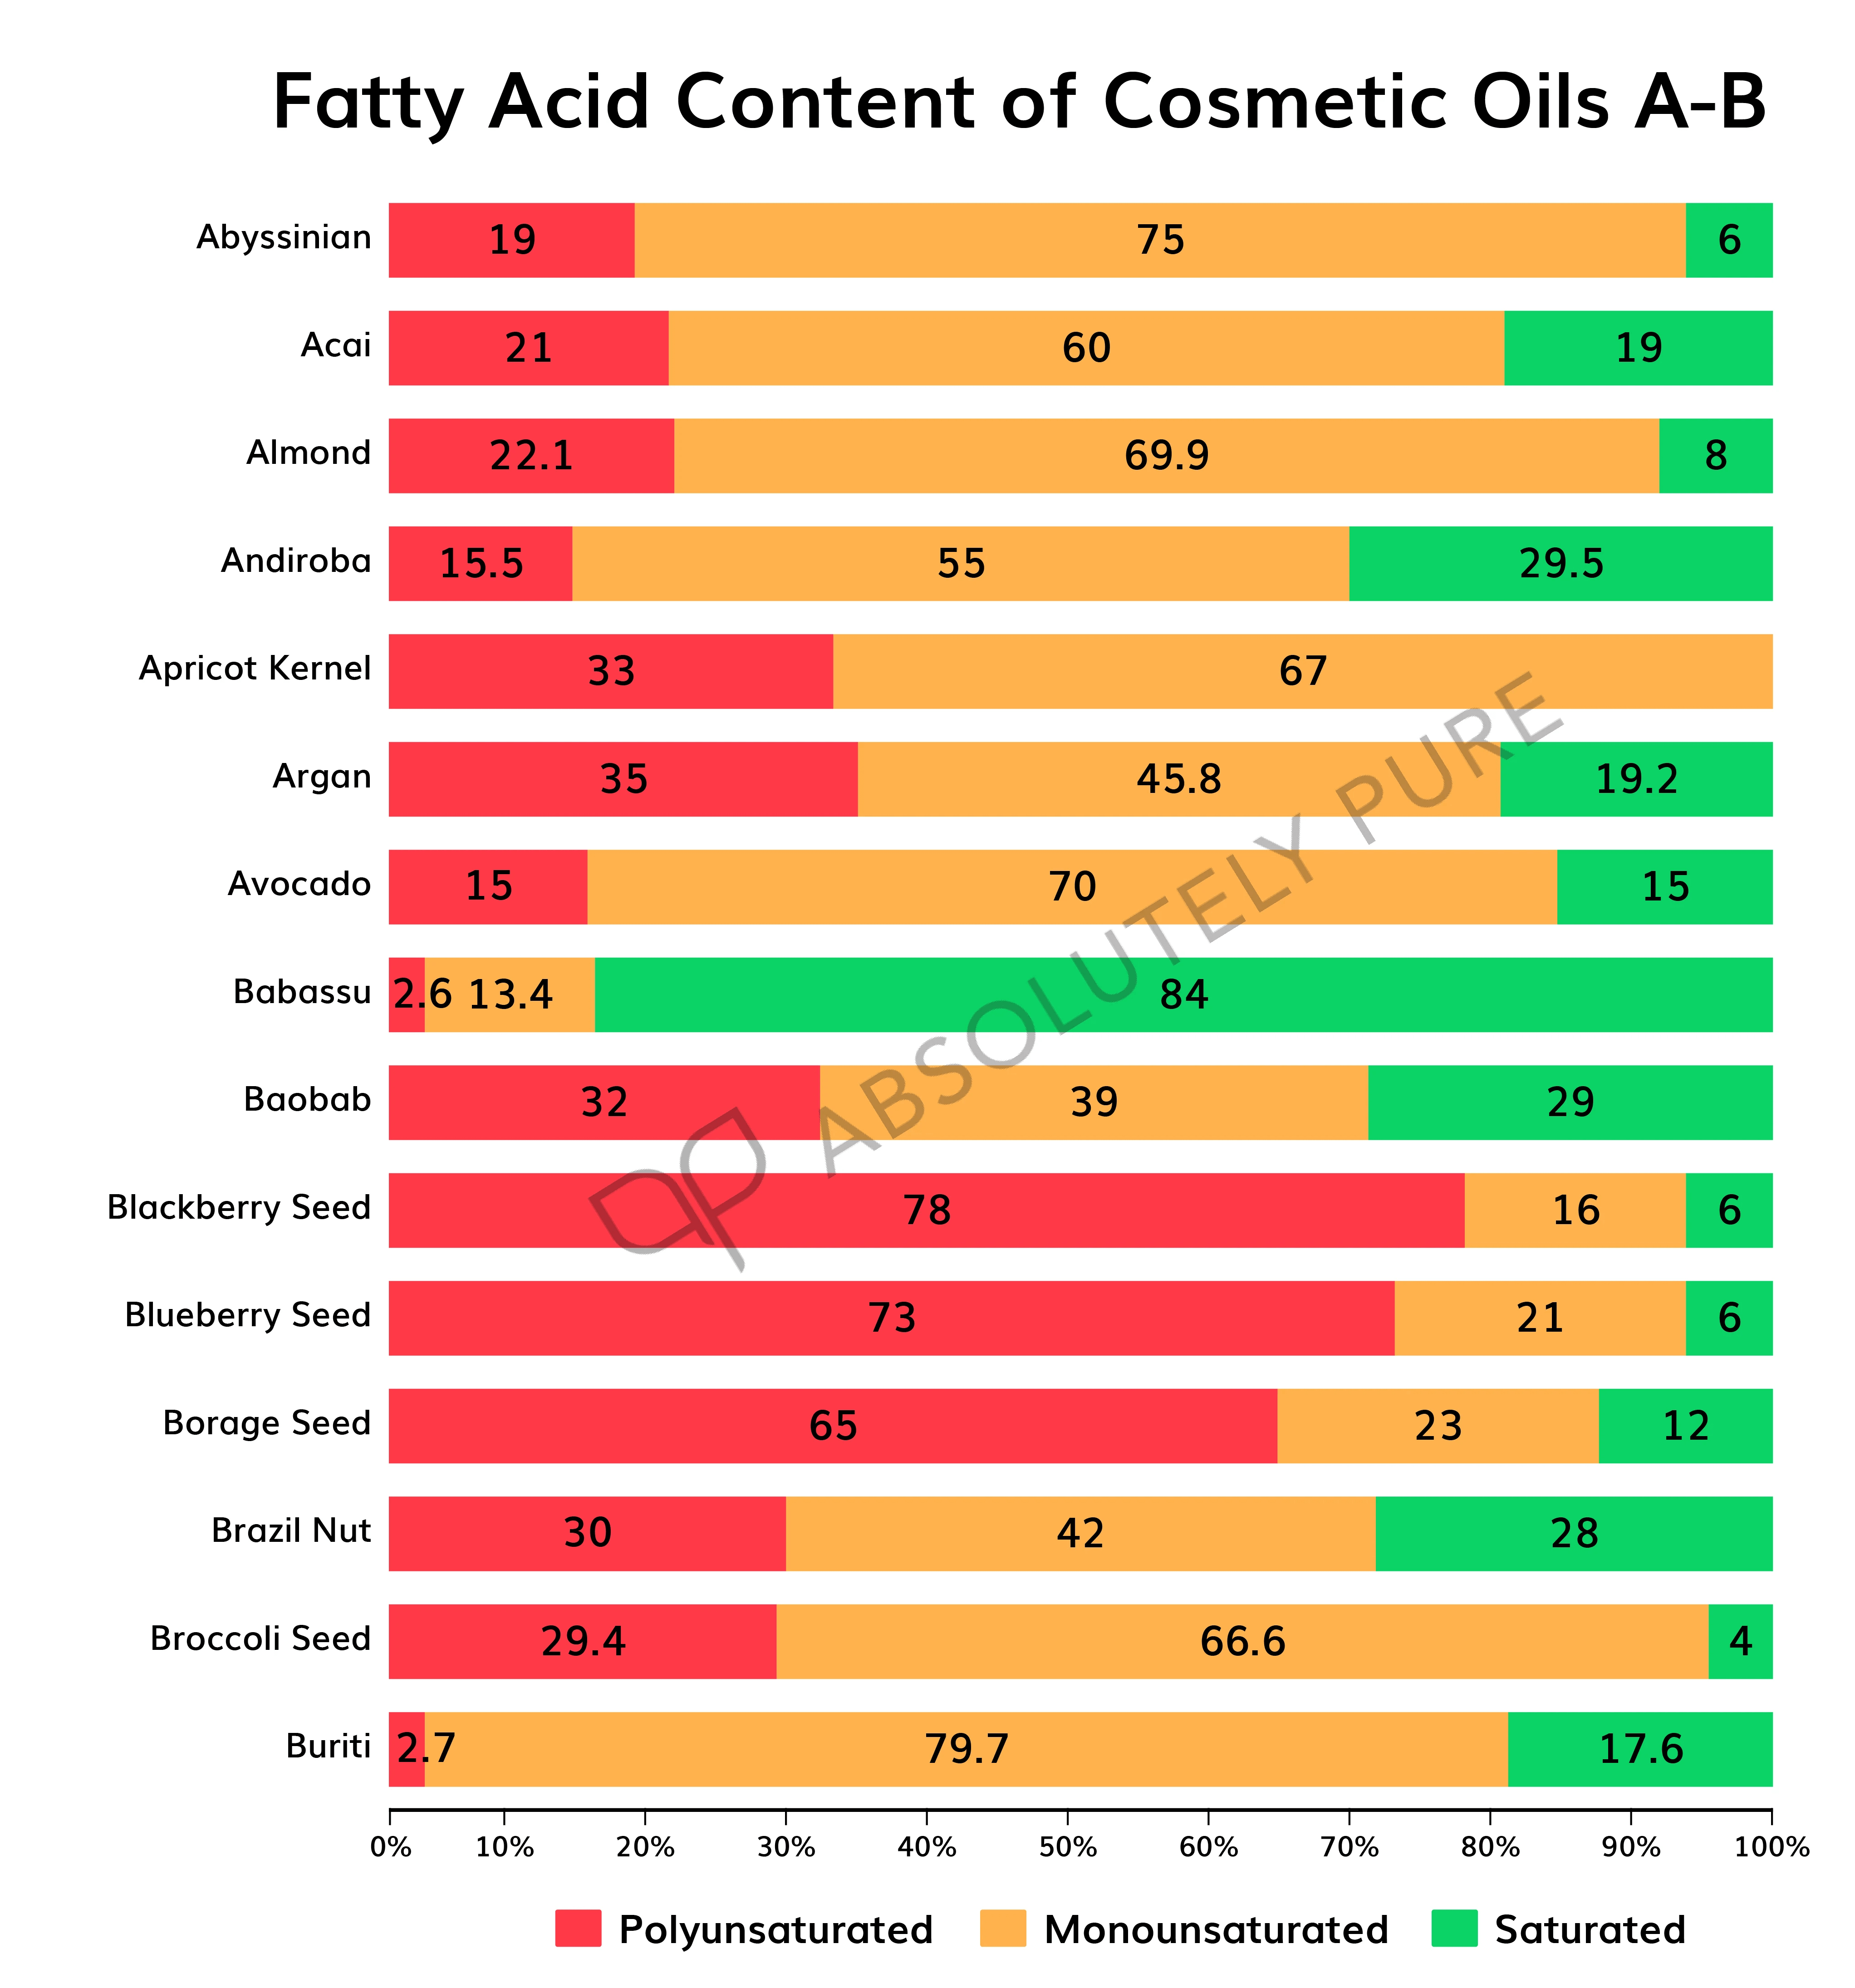 Fatty acid content of cosmetic oils A - G